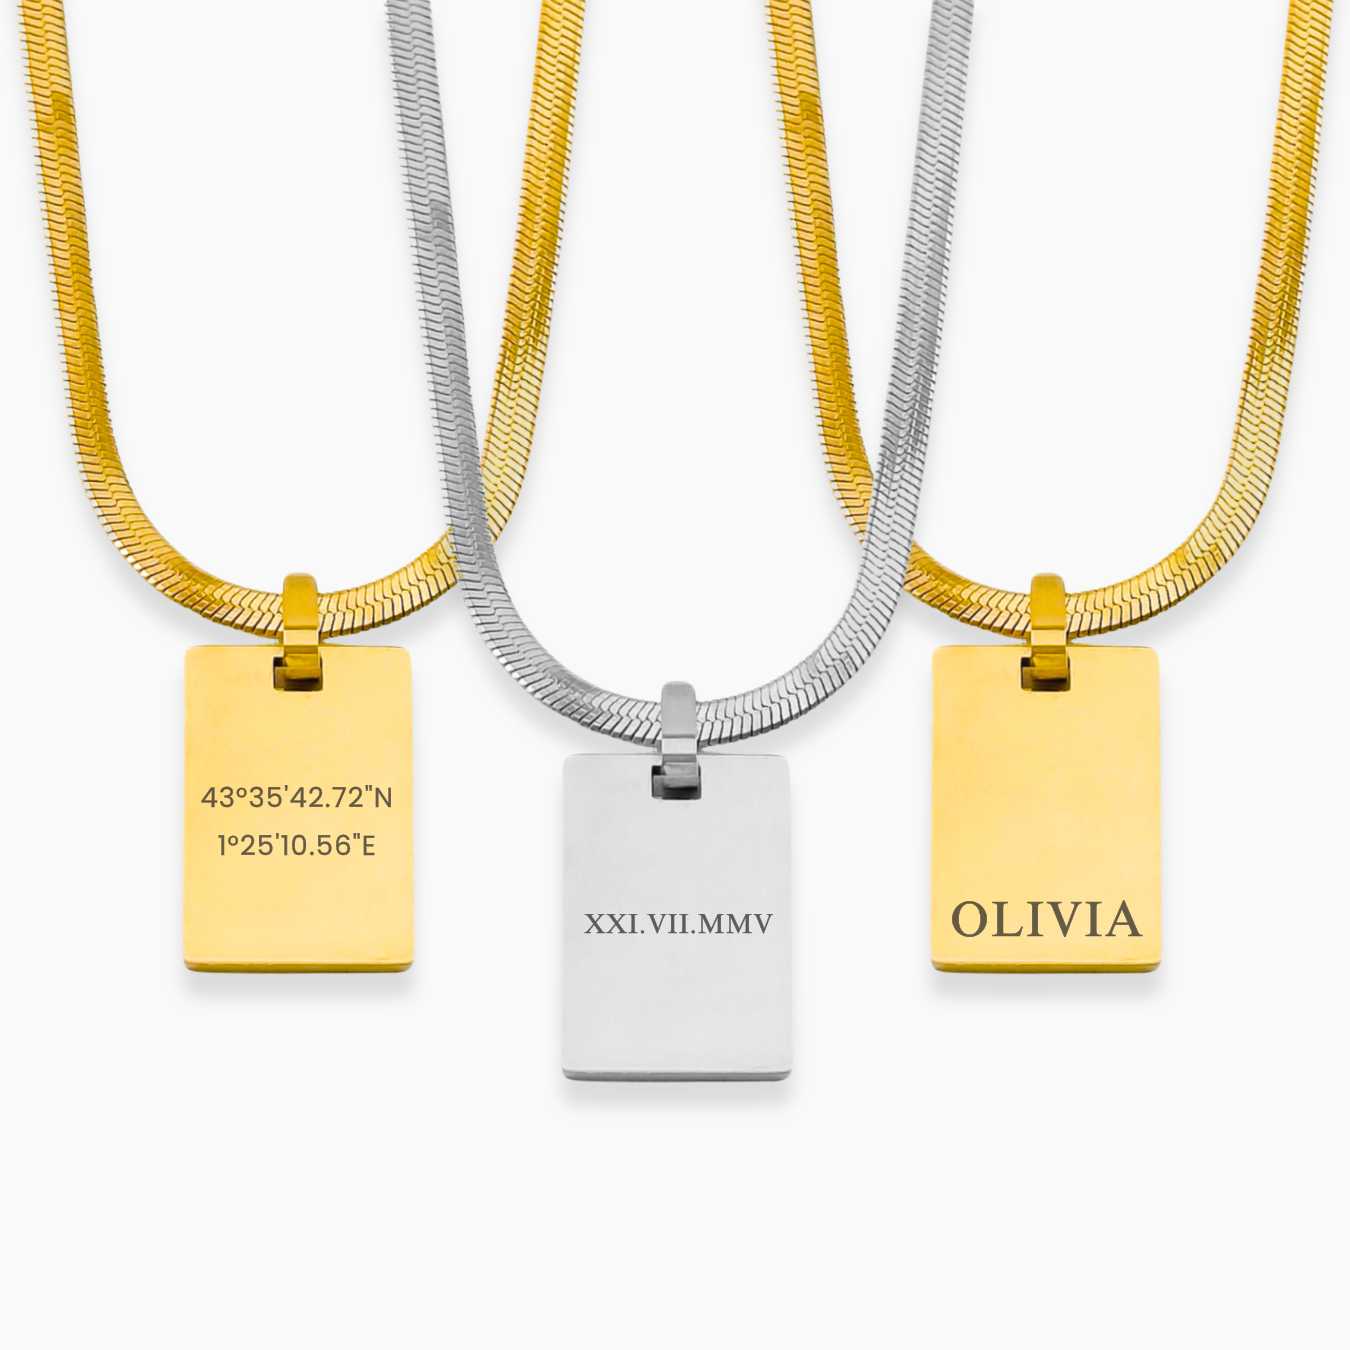 AZUR Personalizable Necklace | Custom Text